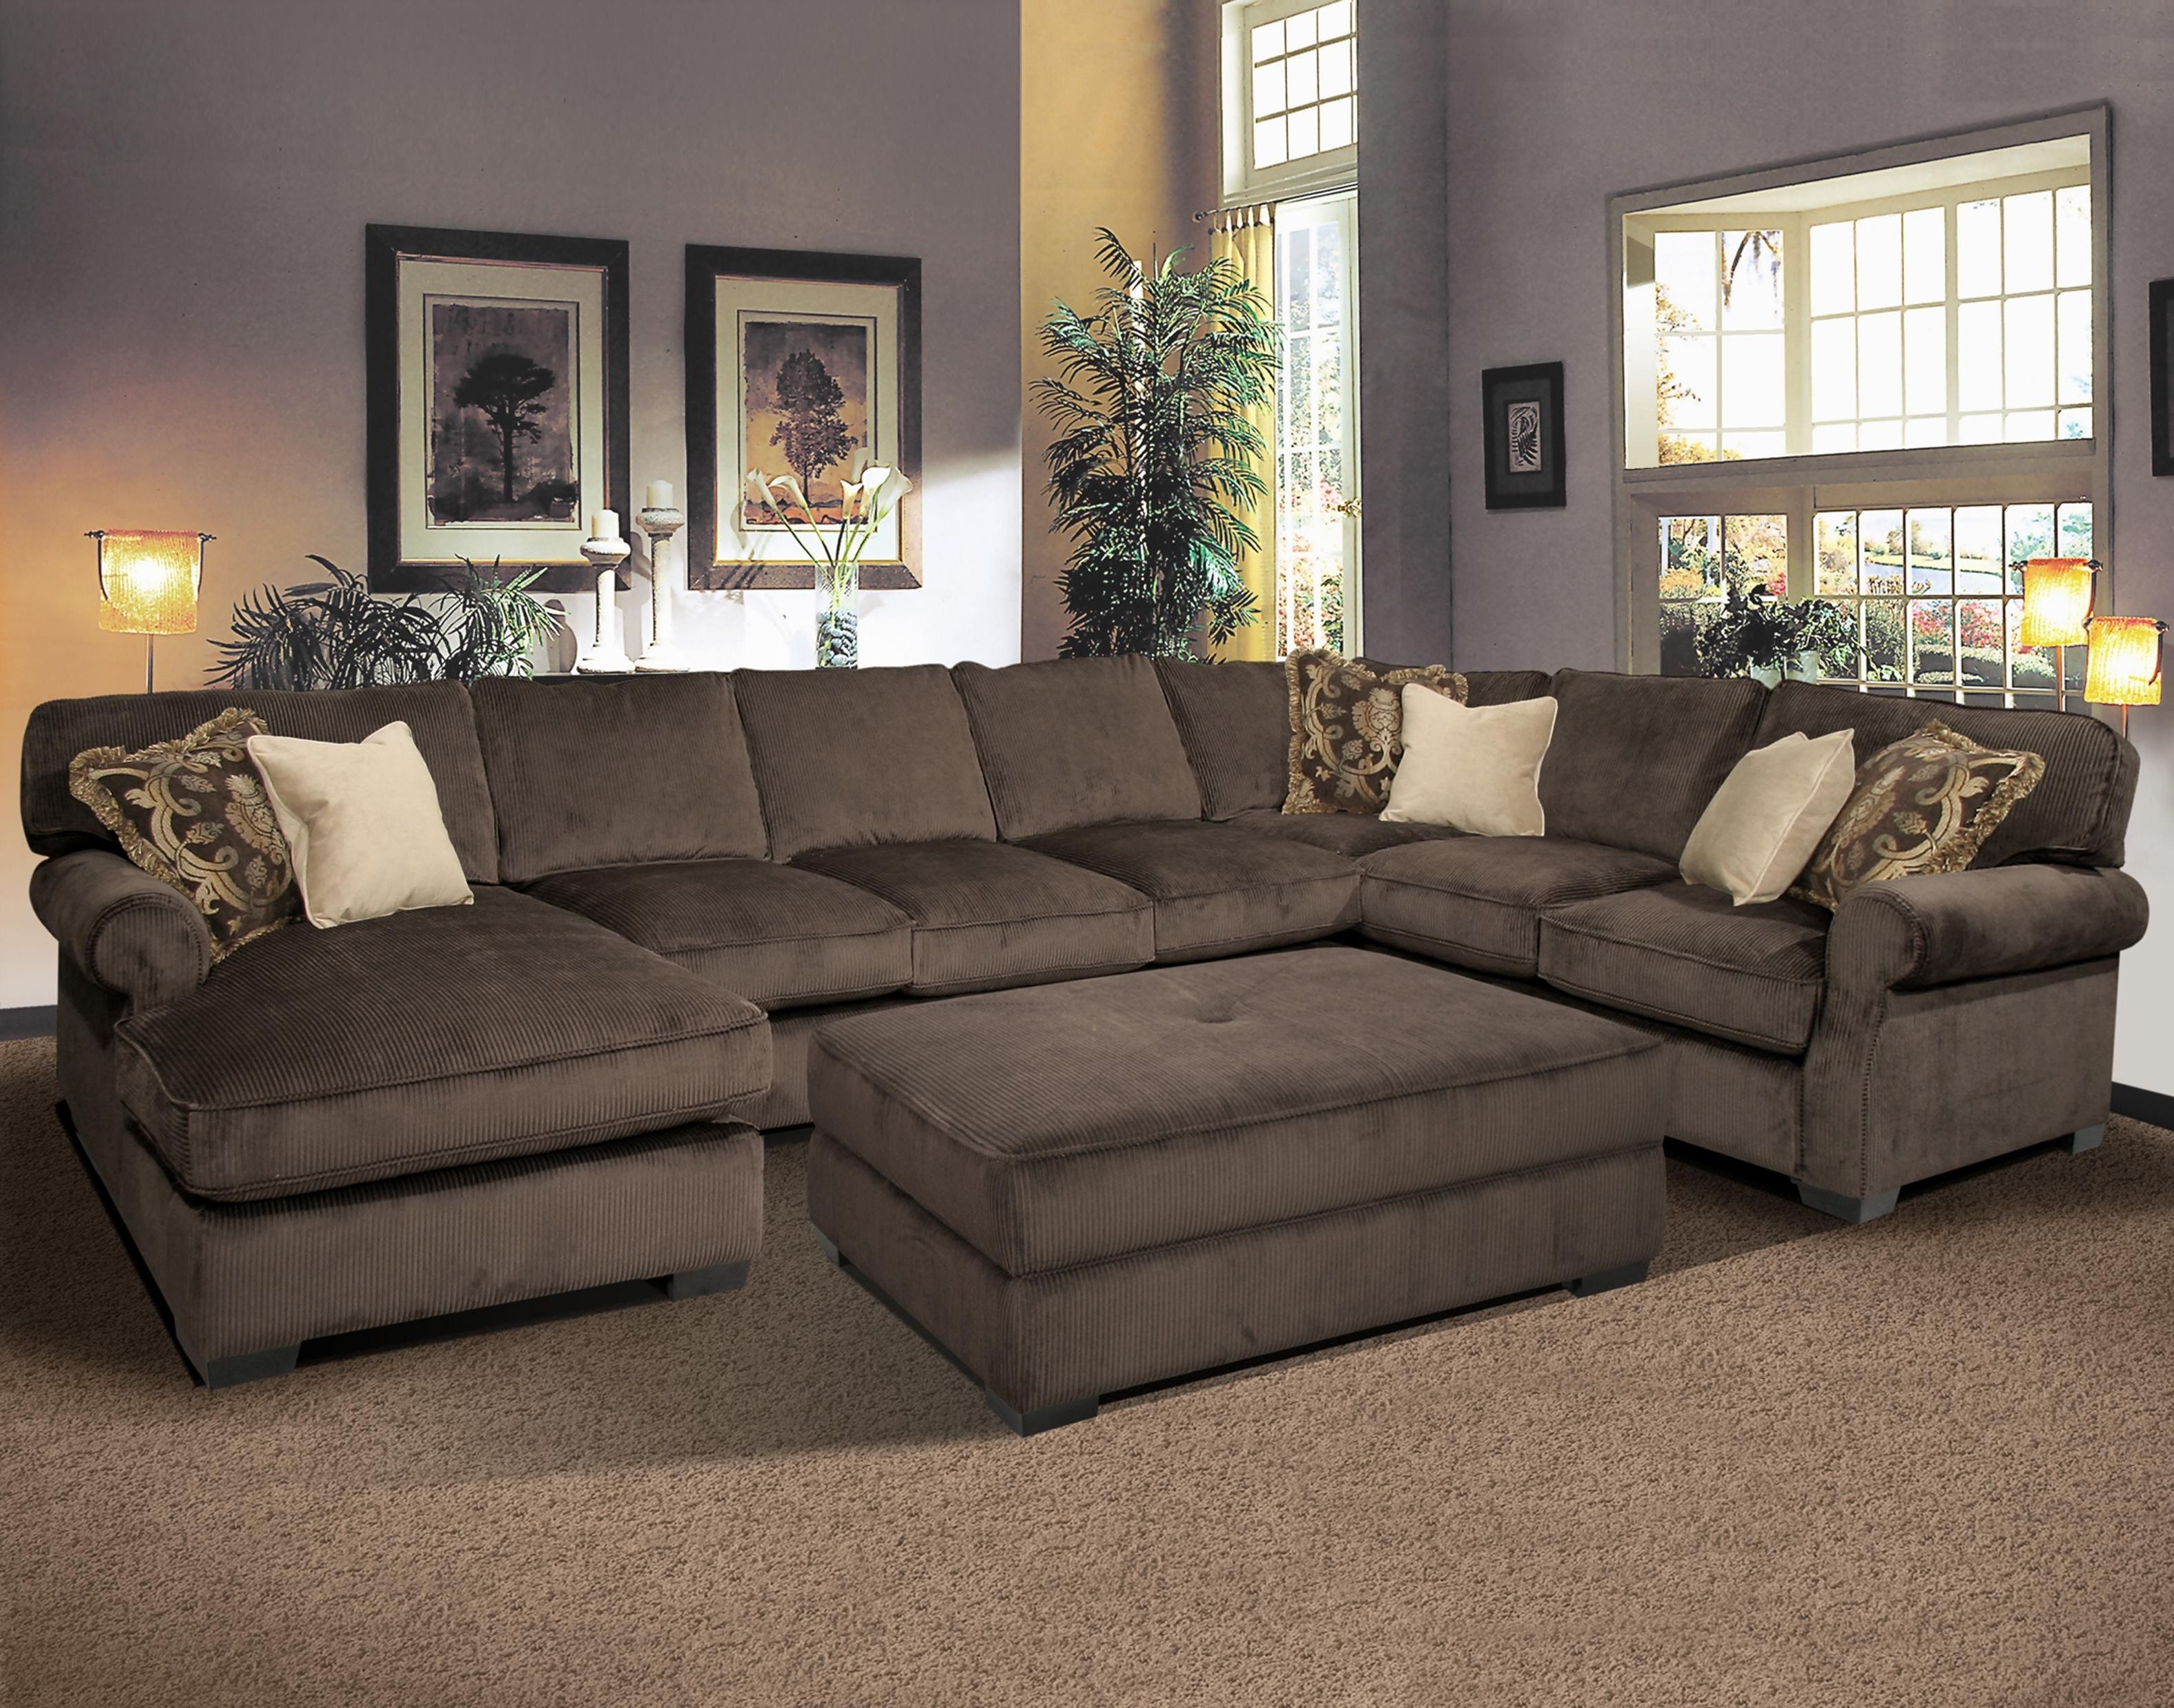 Most Recently Released Photos Wide Seat Sectional Sofas – Buildsimplehome In Wide Seat Sectional Sofas (View 1 of 15)